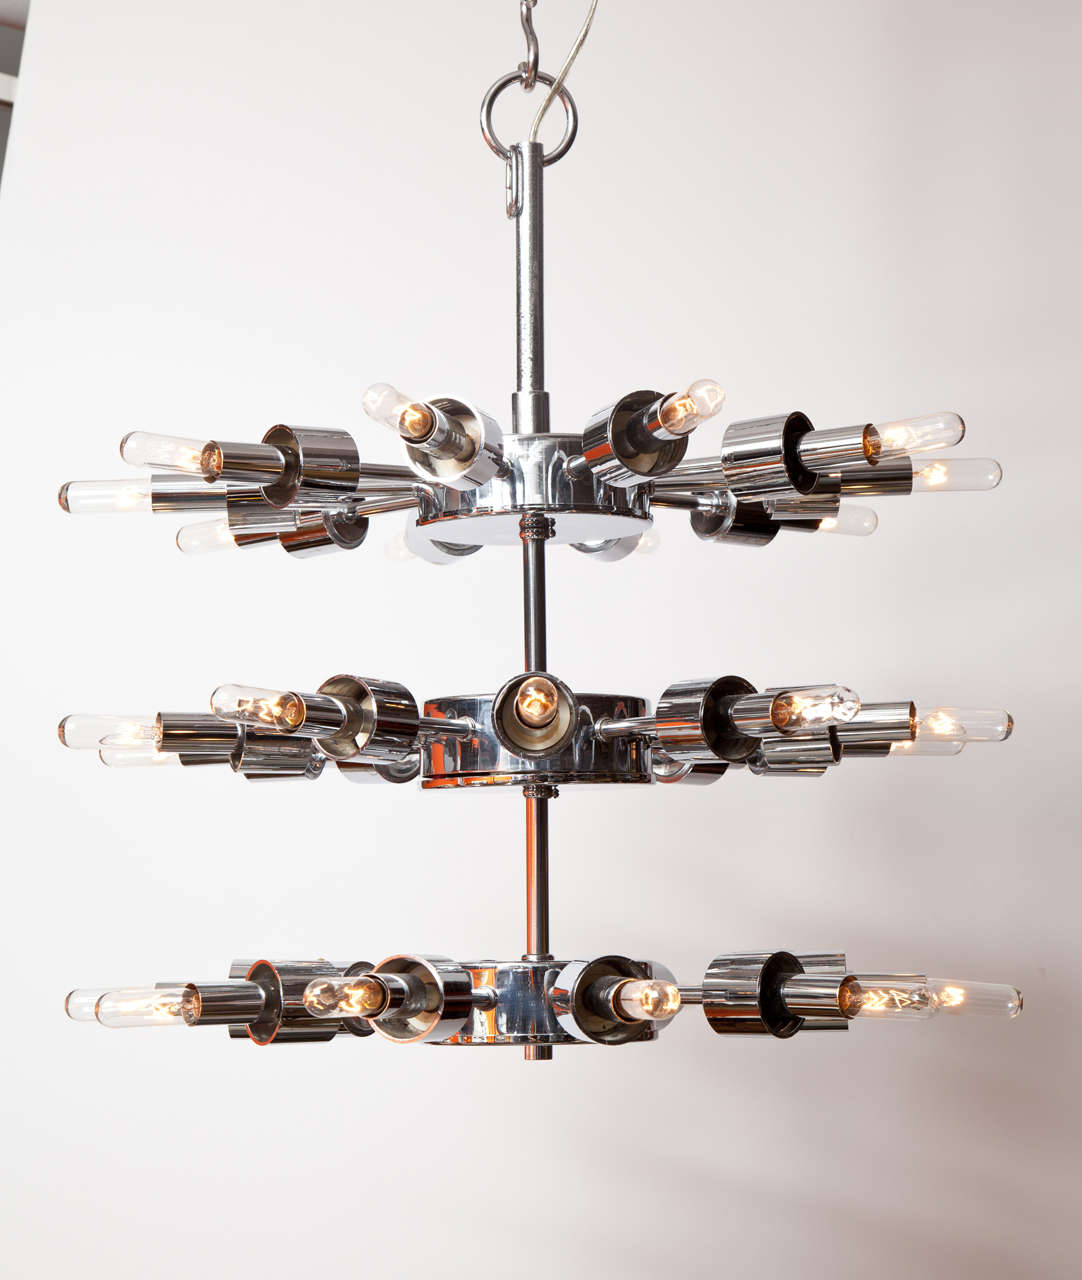 Decorative chrome chandelier from circa 1950. Beautiful designed ceiling fixture with 30 light bulbs.